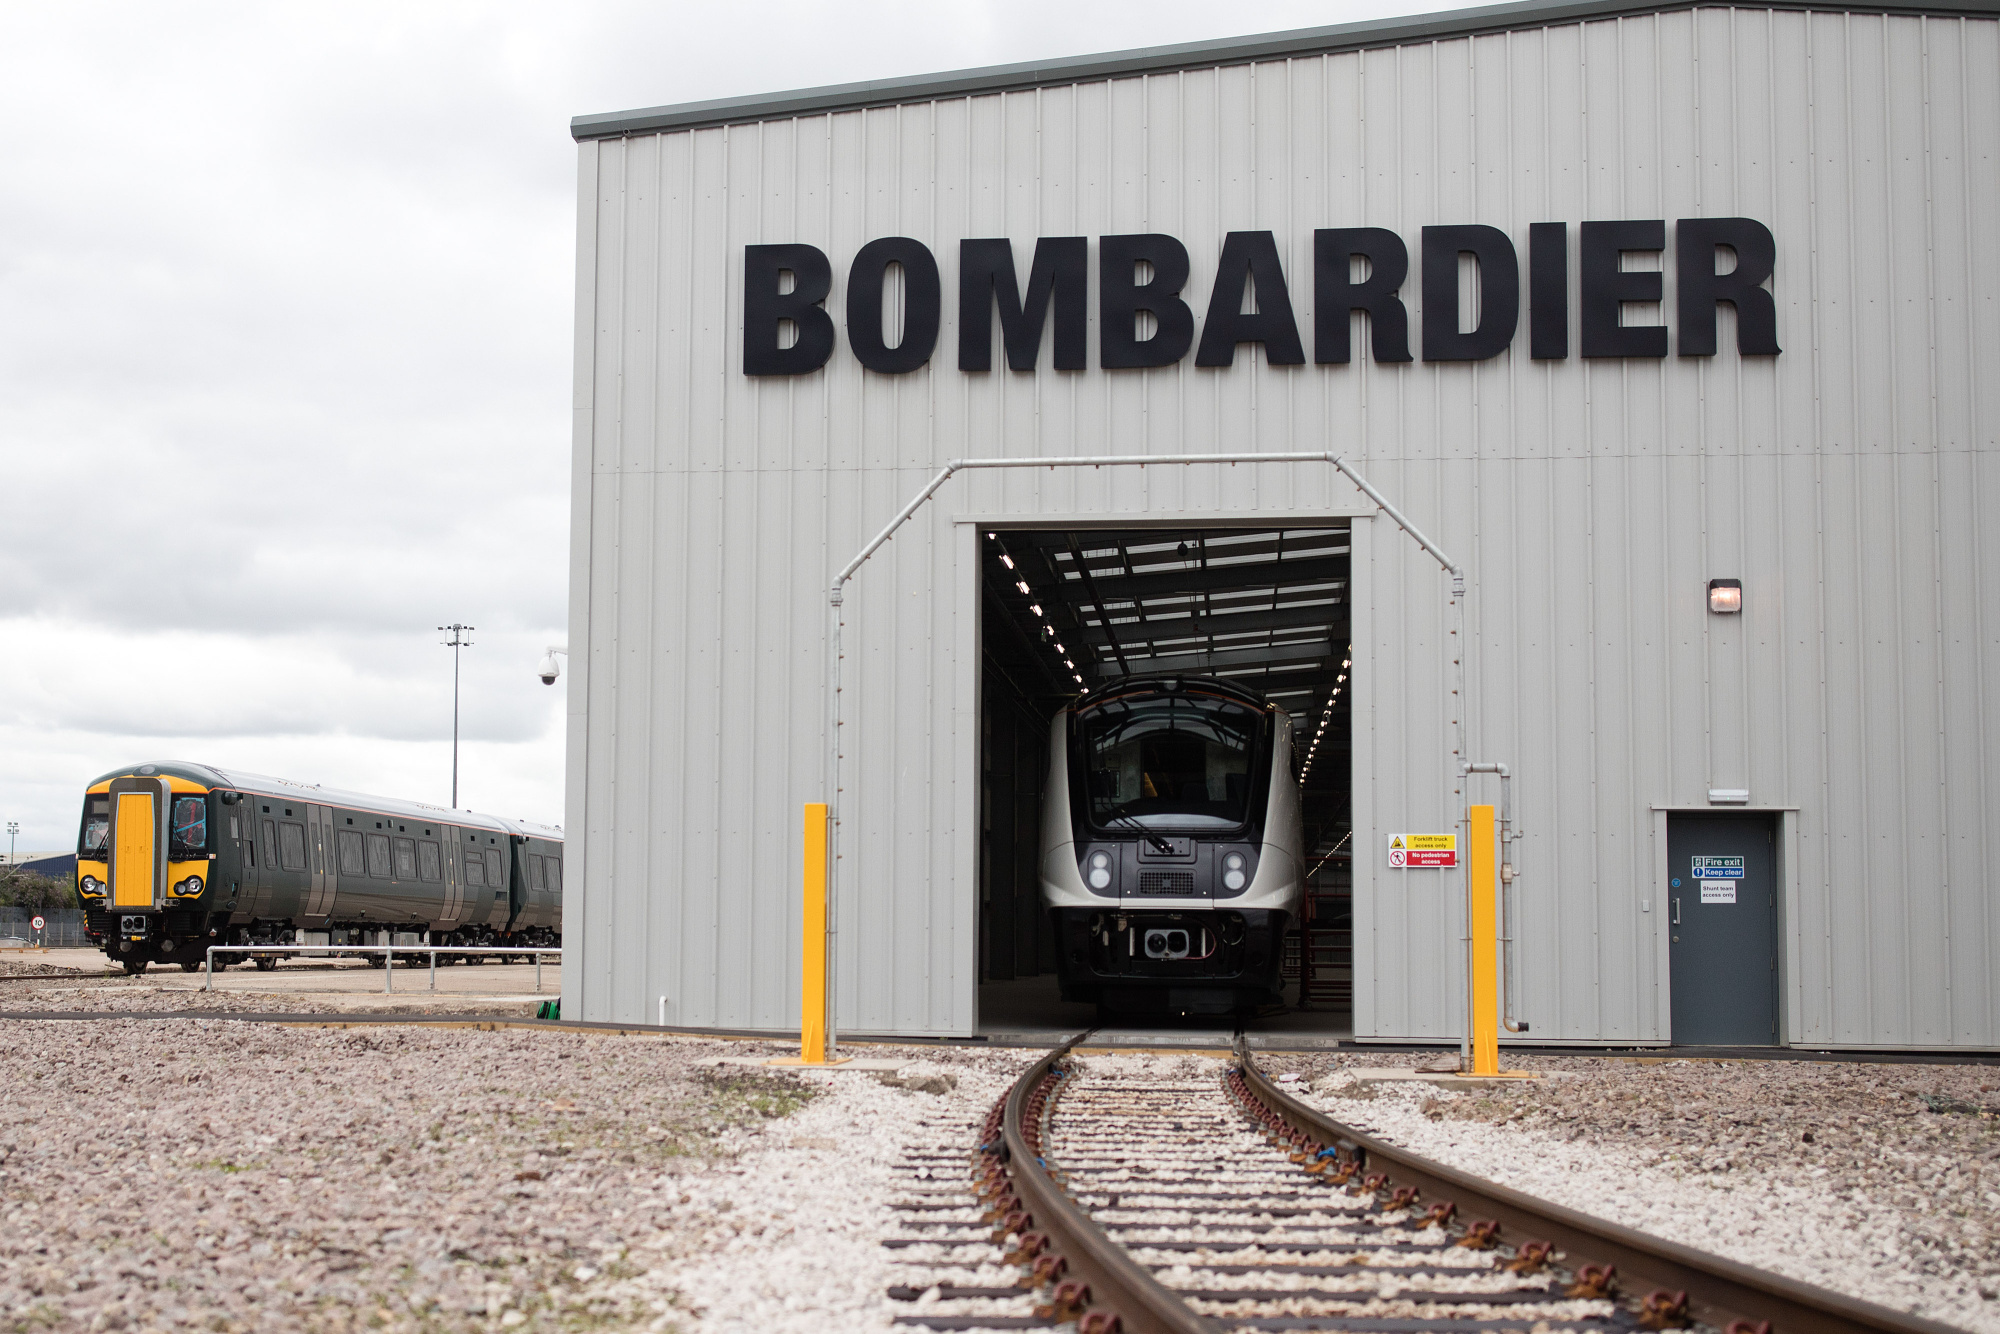 Trains at the Bombardier Transportation UK Rail Vehicles Production Site in Derby, U.K.